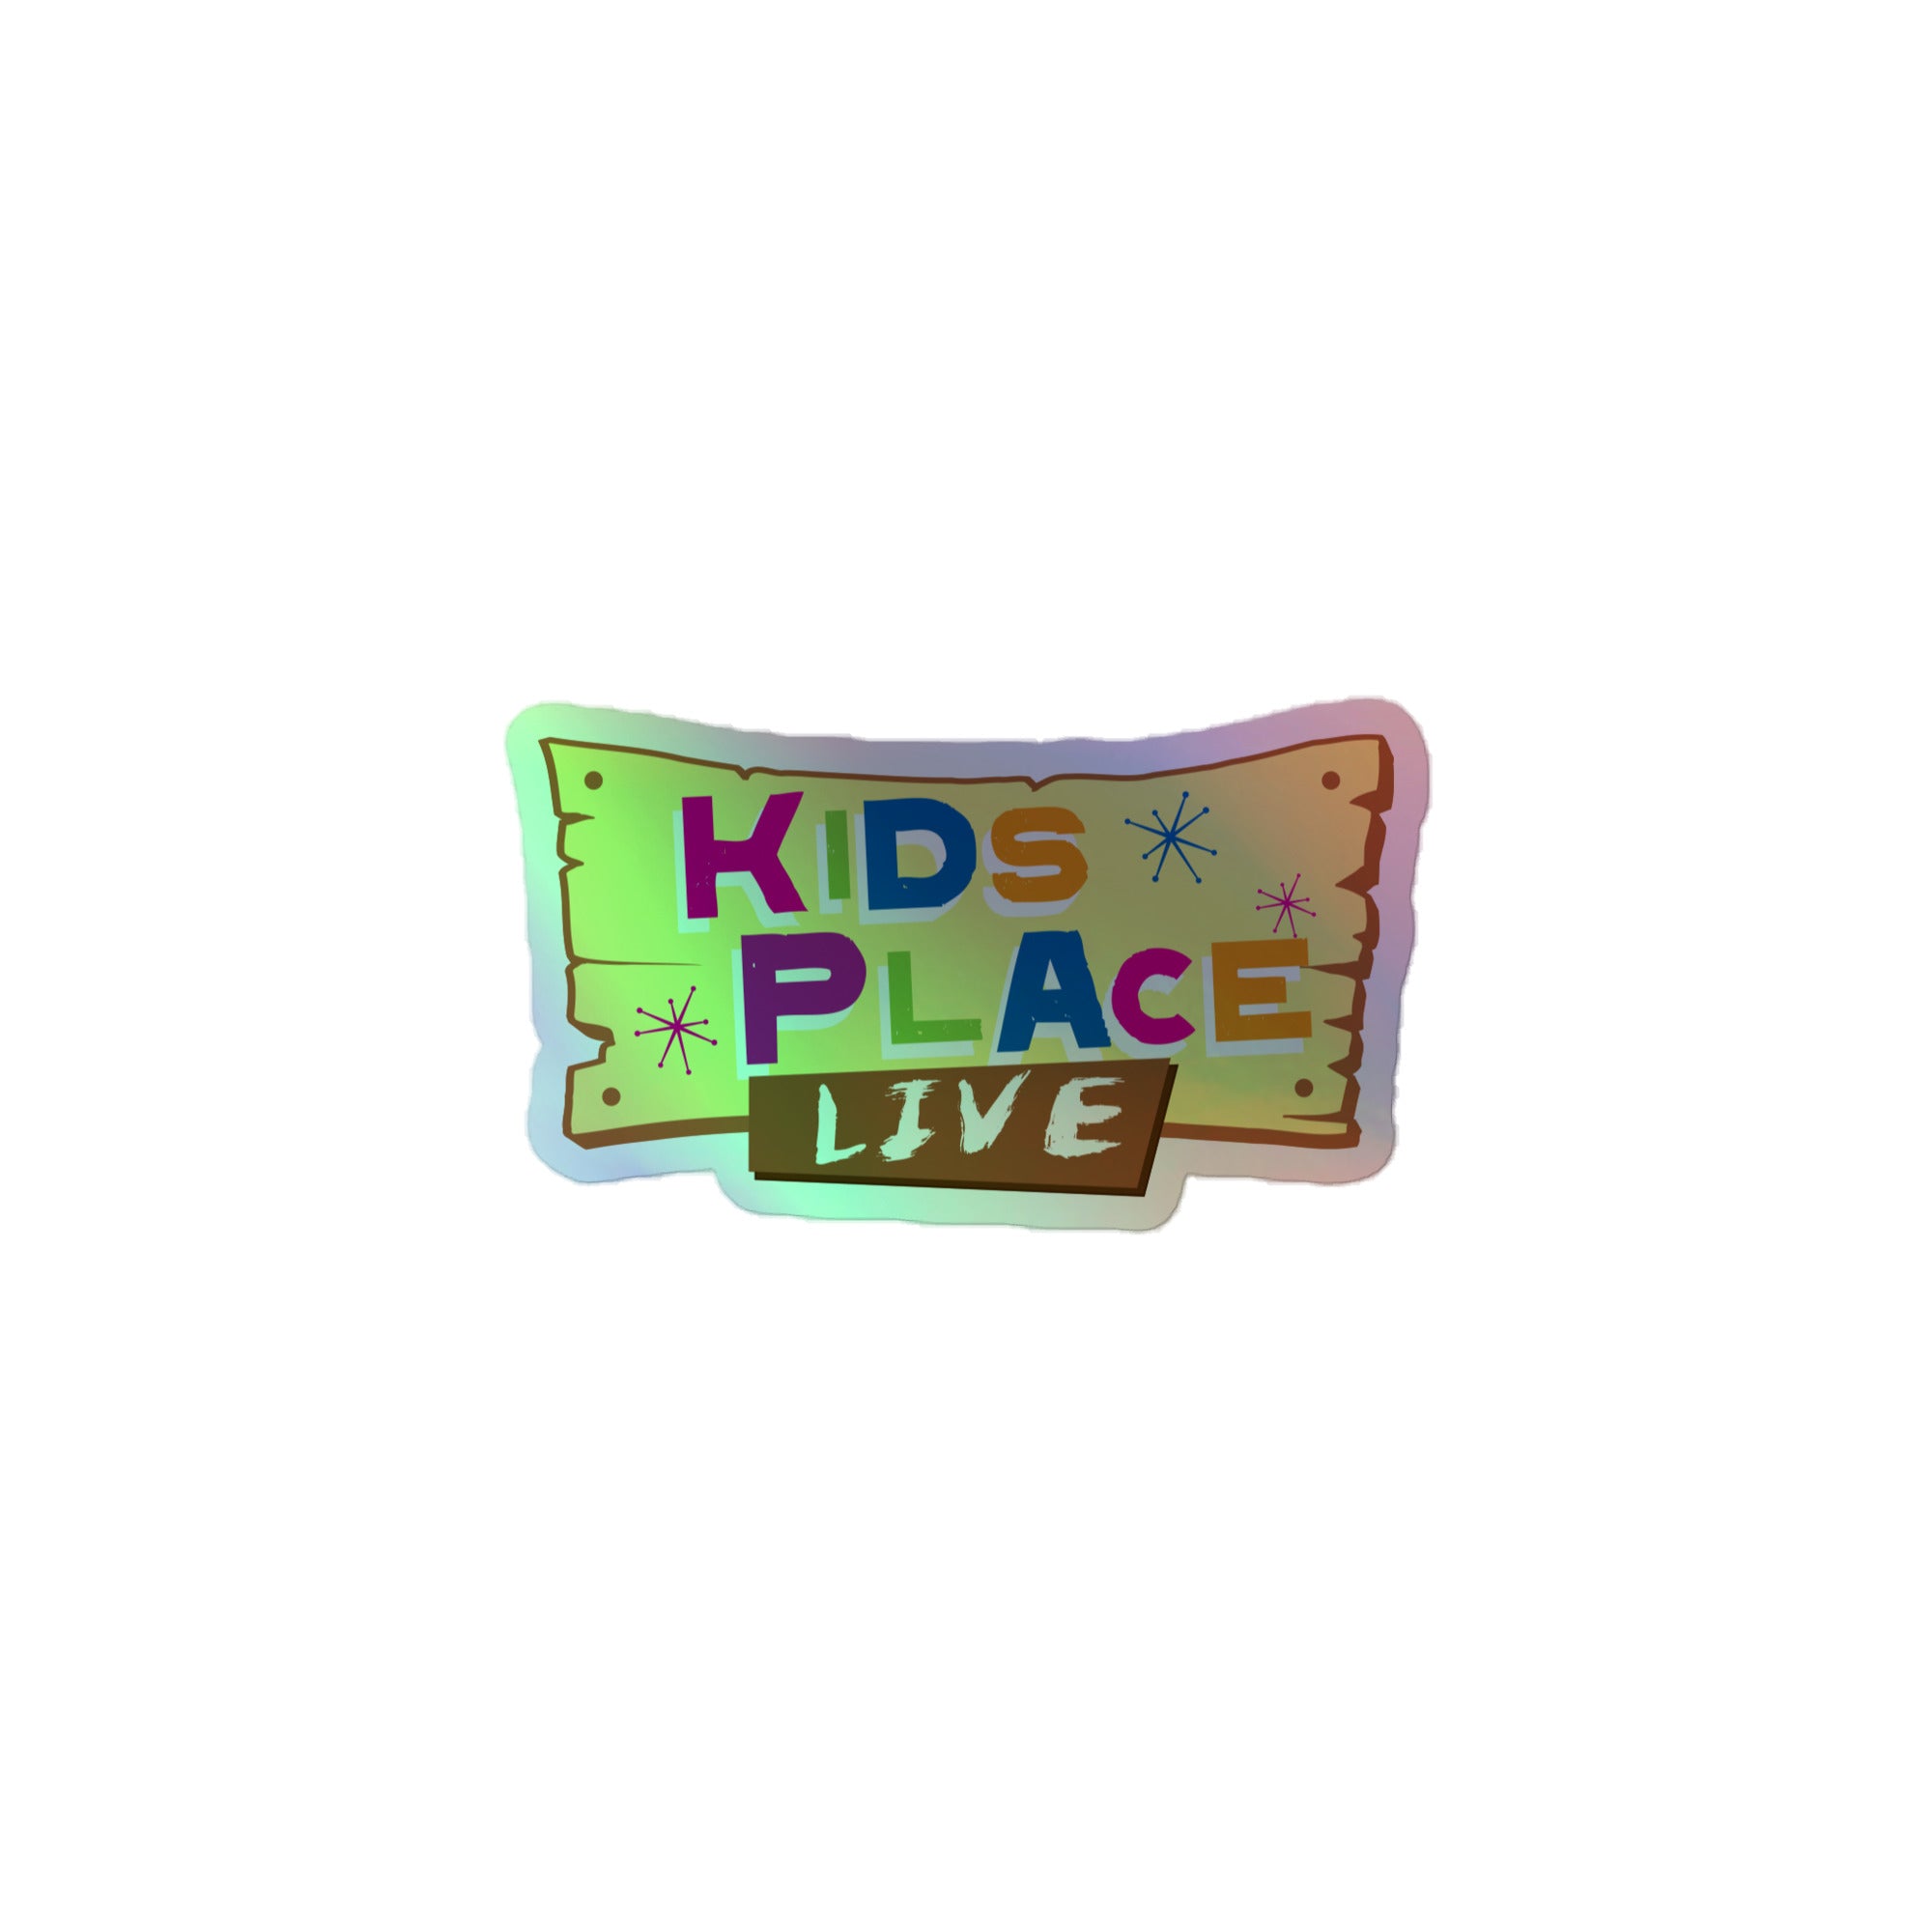 Kids Place Live: Holographic Sticker